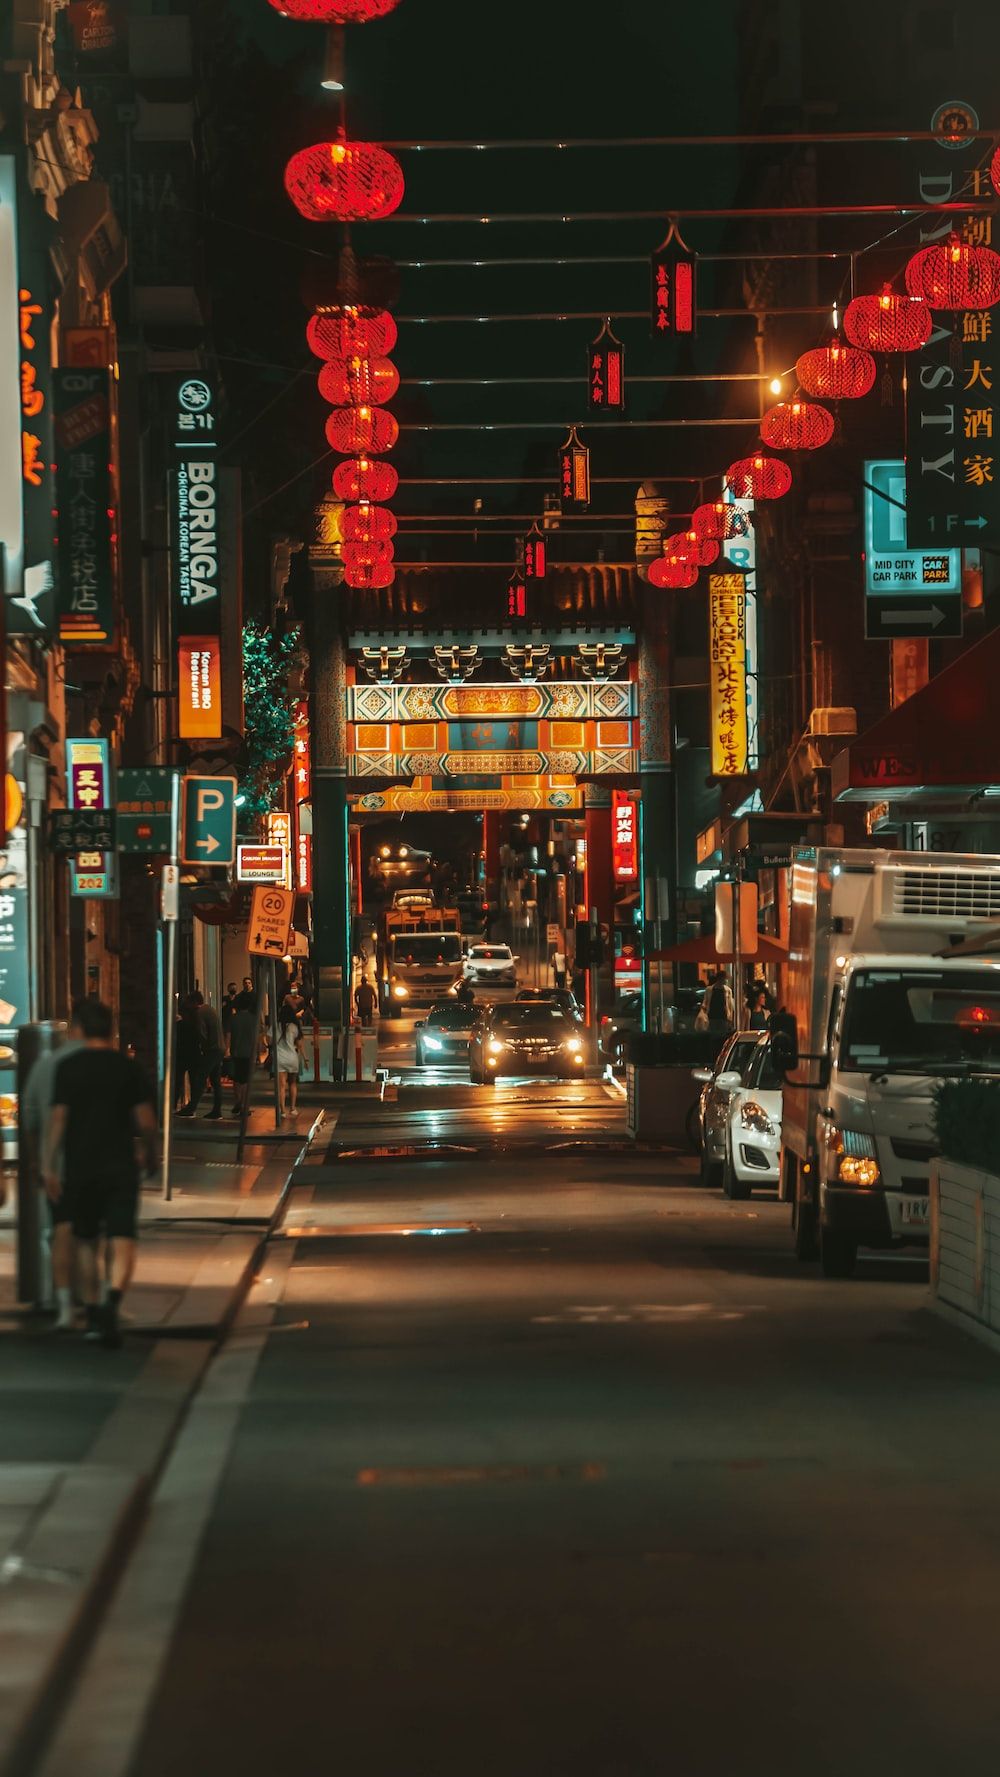 Chinatown Picture. Download Free Image